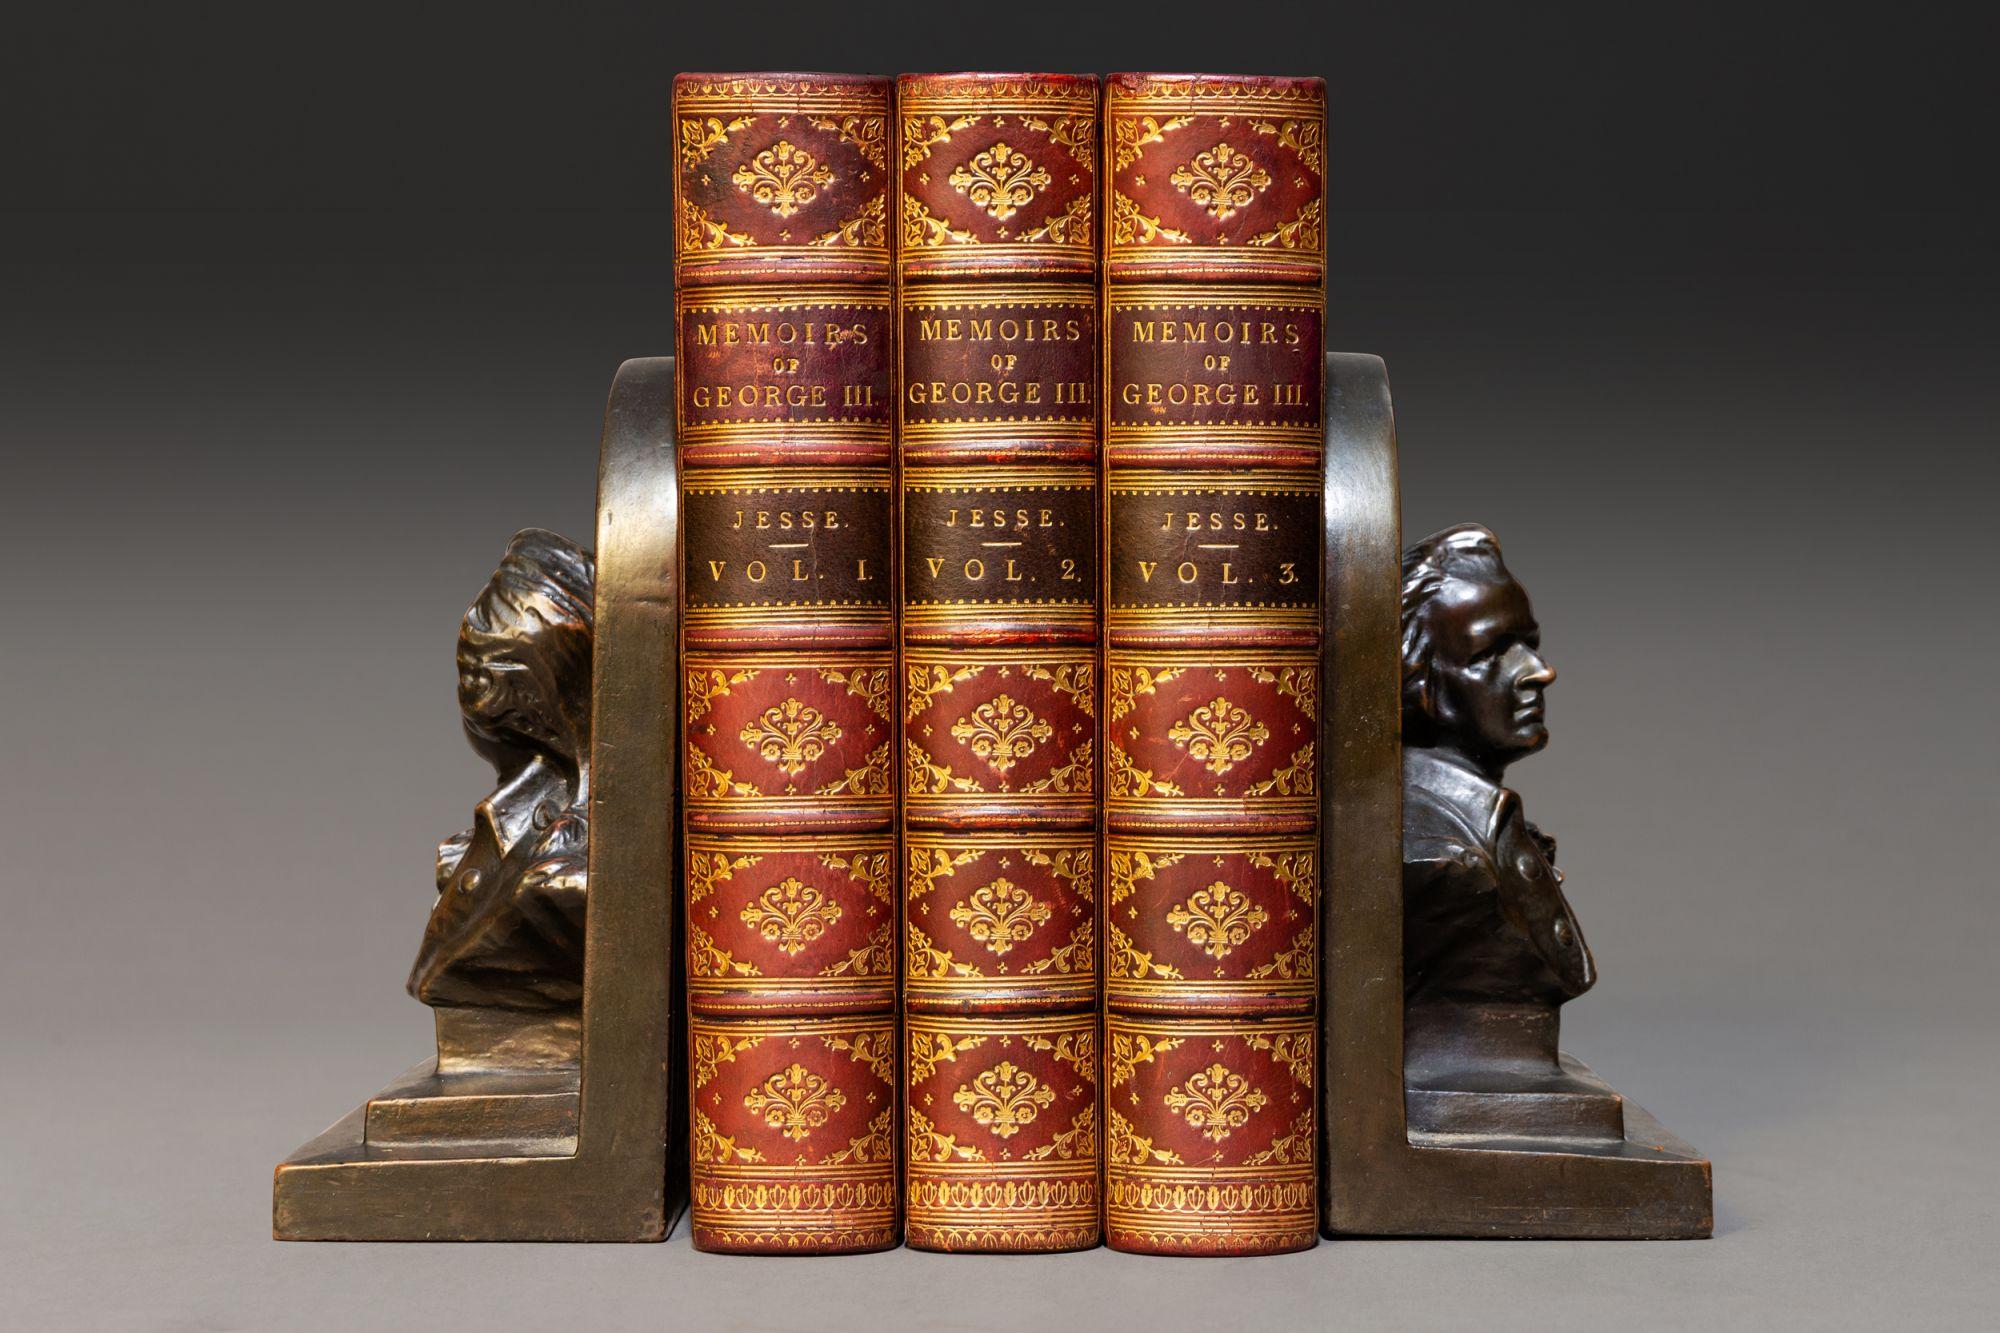 3 Volumes. J. Heneage Jesse. Memoirs of The Life & Reign of King George the Third. First Edition. Bound in wine-colored 3/4 calf. Marbled boards, marbled endpapers, marbled edges, ornate gilt on spines, raised bands. 
Published: London: Tinsley